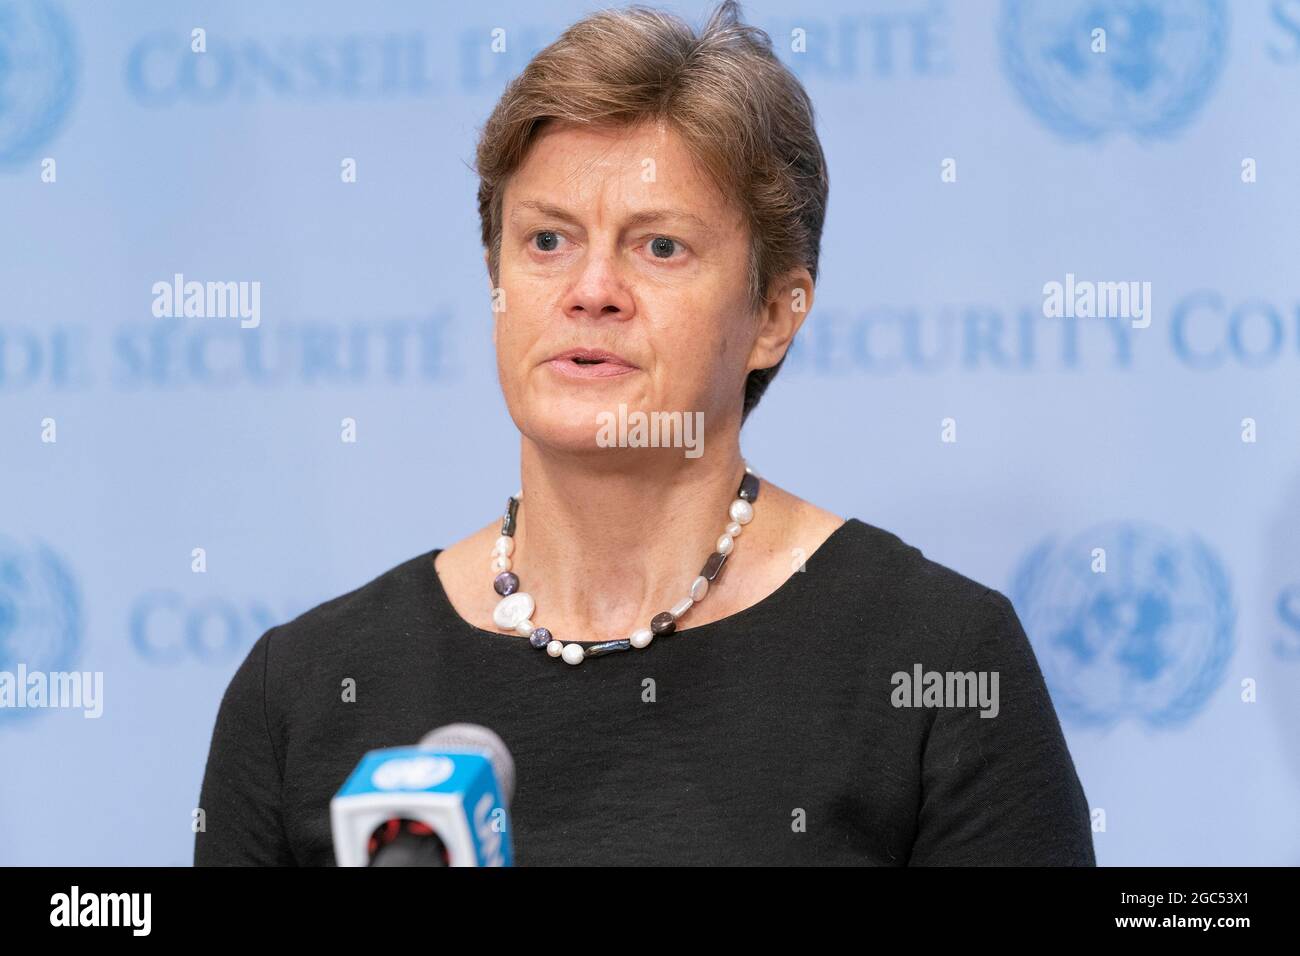 New York, United States. 06th Aug, 2021. The Permanent Representative of the United Kingdom to the UN Ambassador Dame Barbara Woodward addressed media at stakeout at UN Headquarters in New York on August 6, 2021. The Ambassador discussed the Security Council meeting on the situation in Persian Gulf, she accused Iran of being behind a drone attack on the ship off the coast of Oman in which 2 people were killed, one of them British national and another Romanian. (Photo by Lev Radin/Sipa USA) Credit: Sipa USA/Alamy Live News Stock Photo